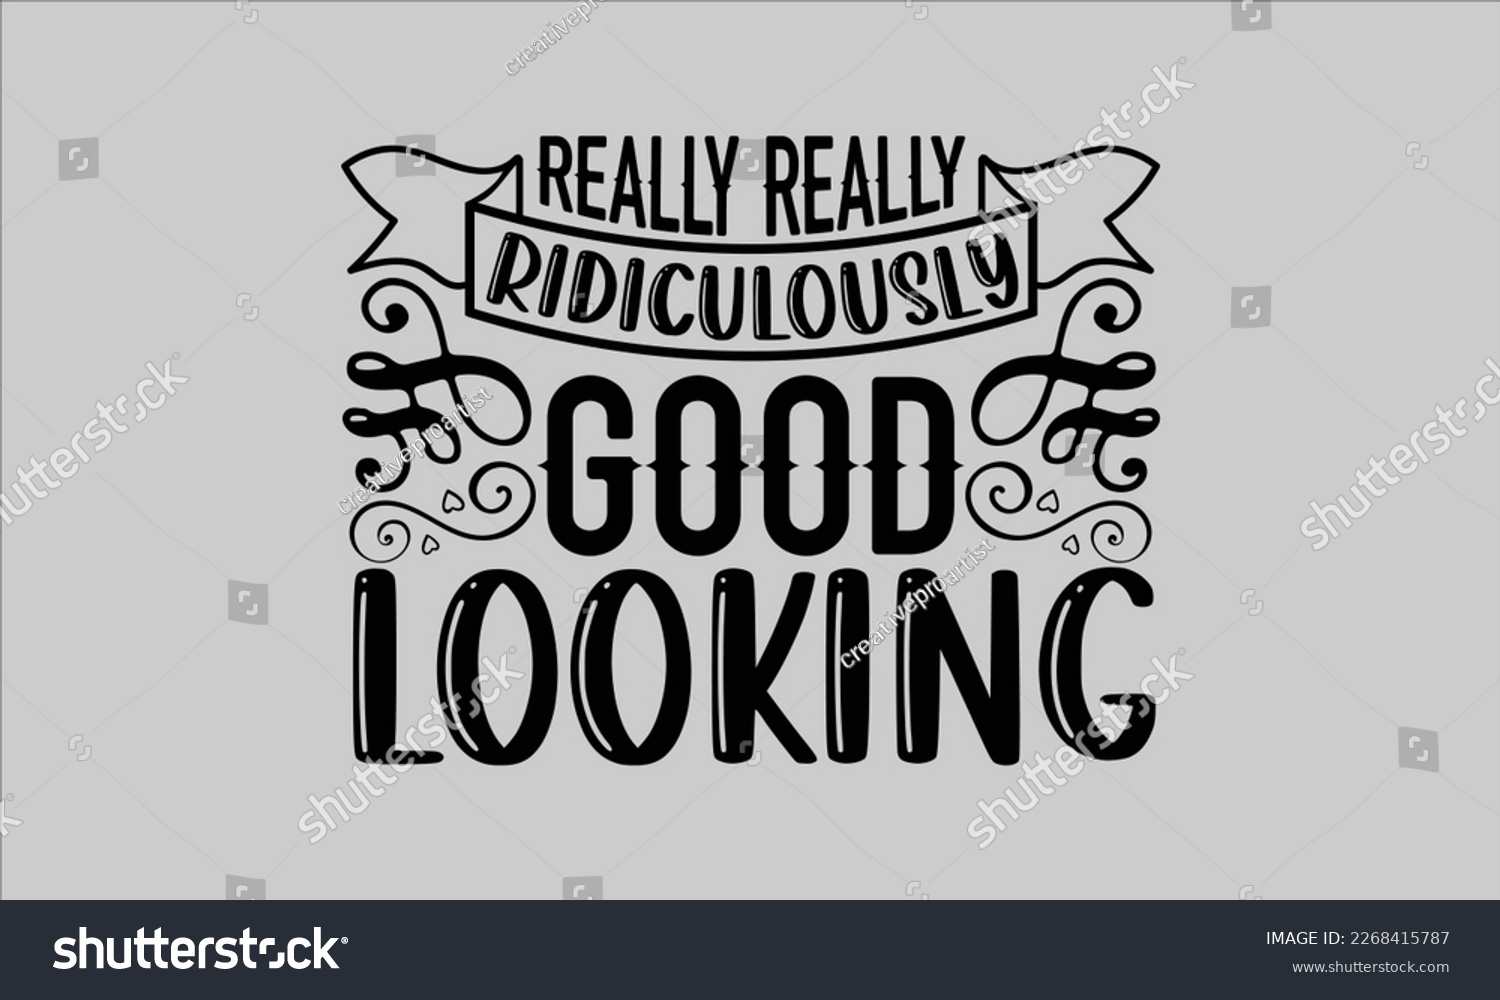 SVG of Really really ridiculously good looking- Piano t- shirt design, Template Vector and Sports illustration, lettering on a white background for svg Cutting Machine, posters mog, bags eps 10. svg